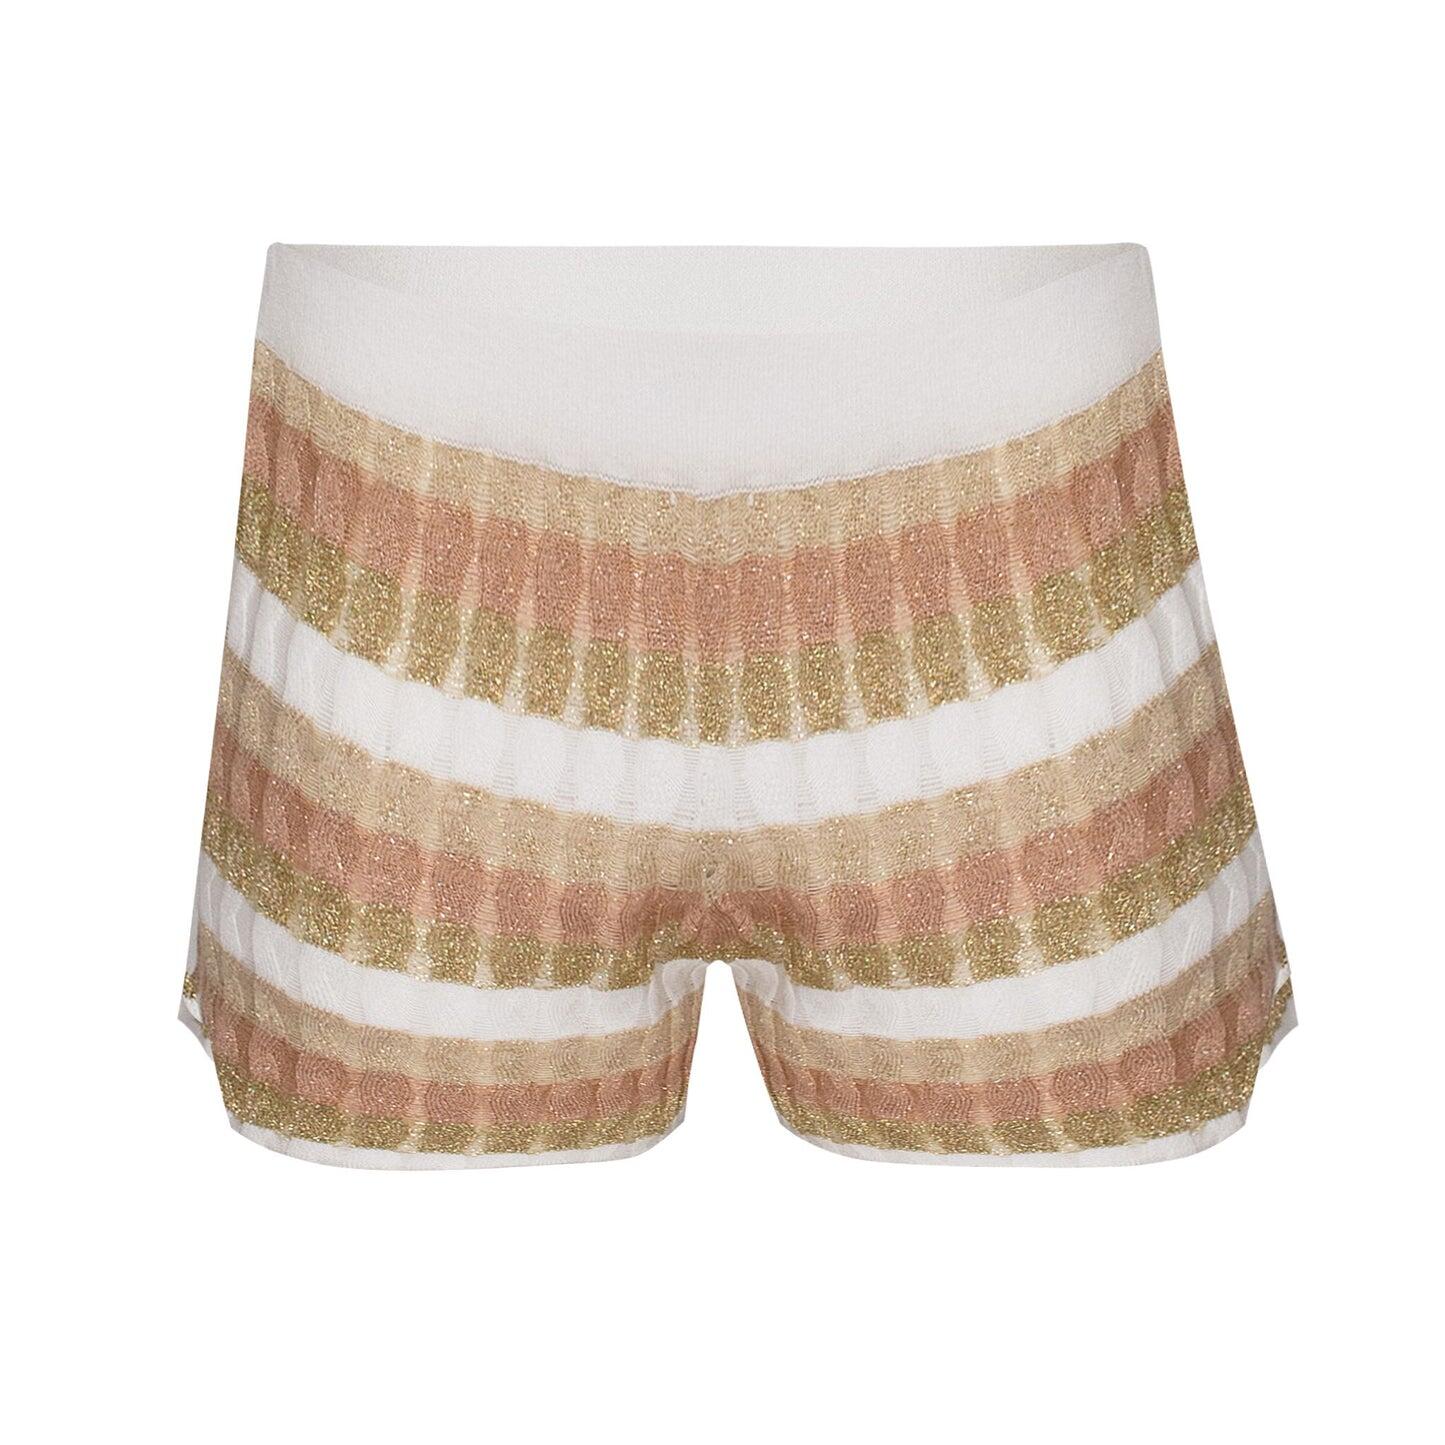 Shorts in Racking Knit White/Gold/Peach/Beige